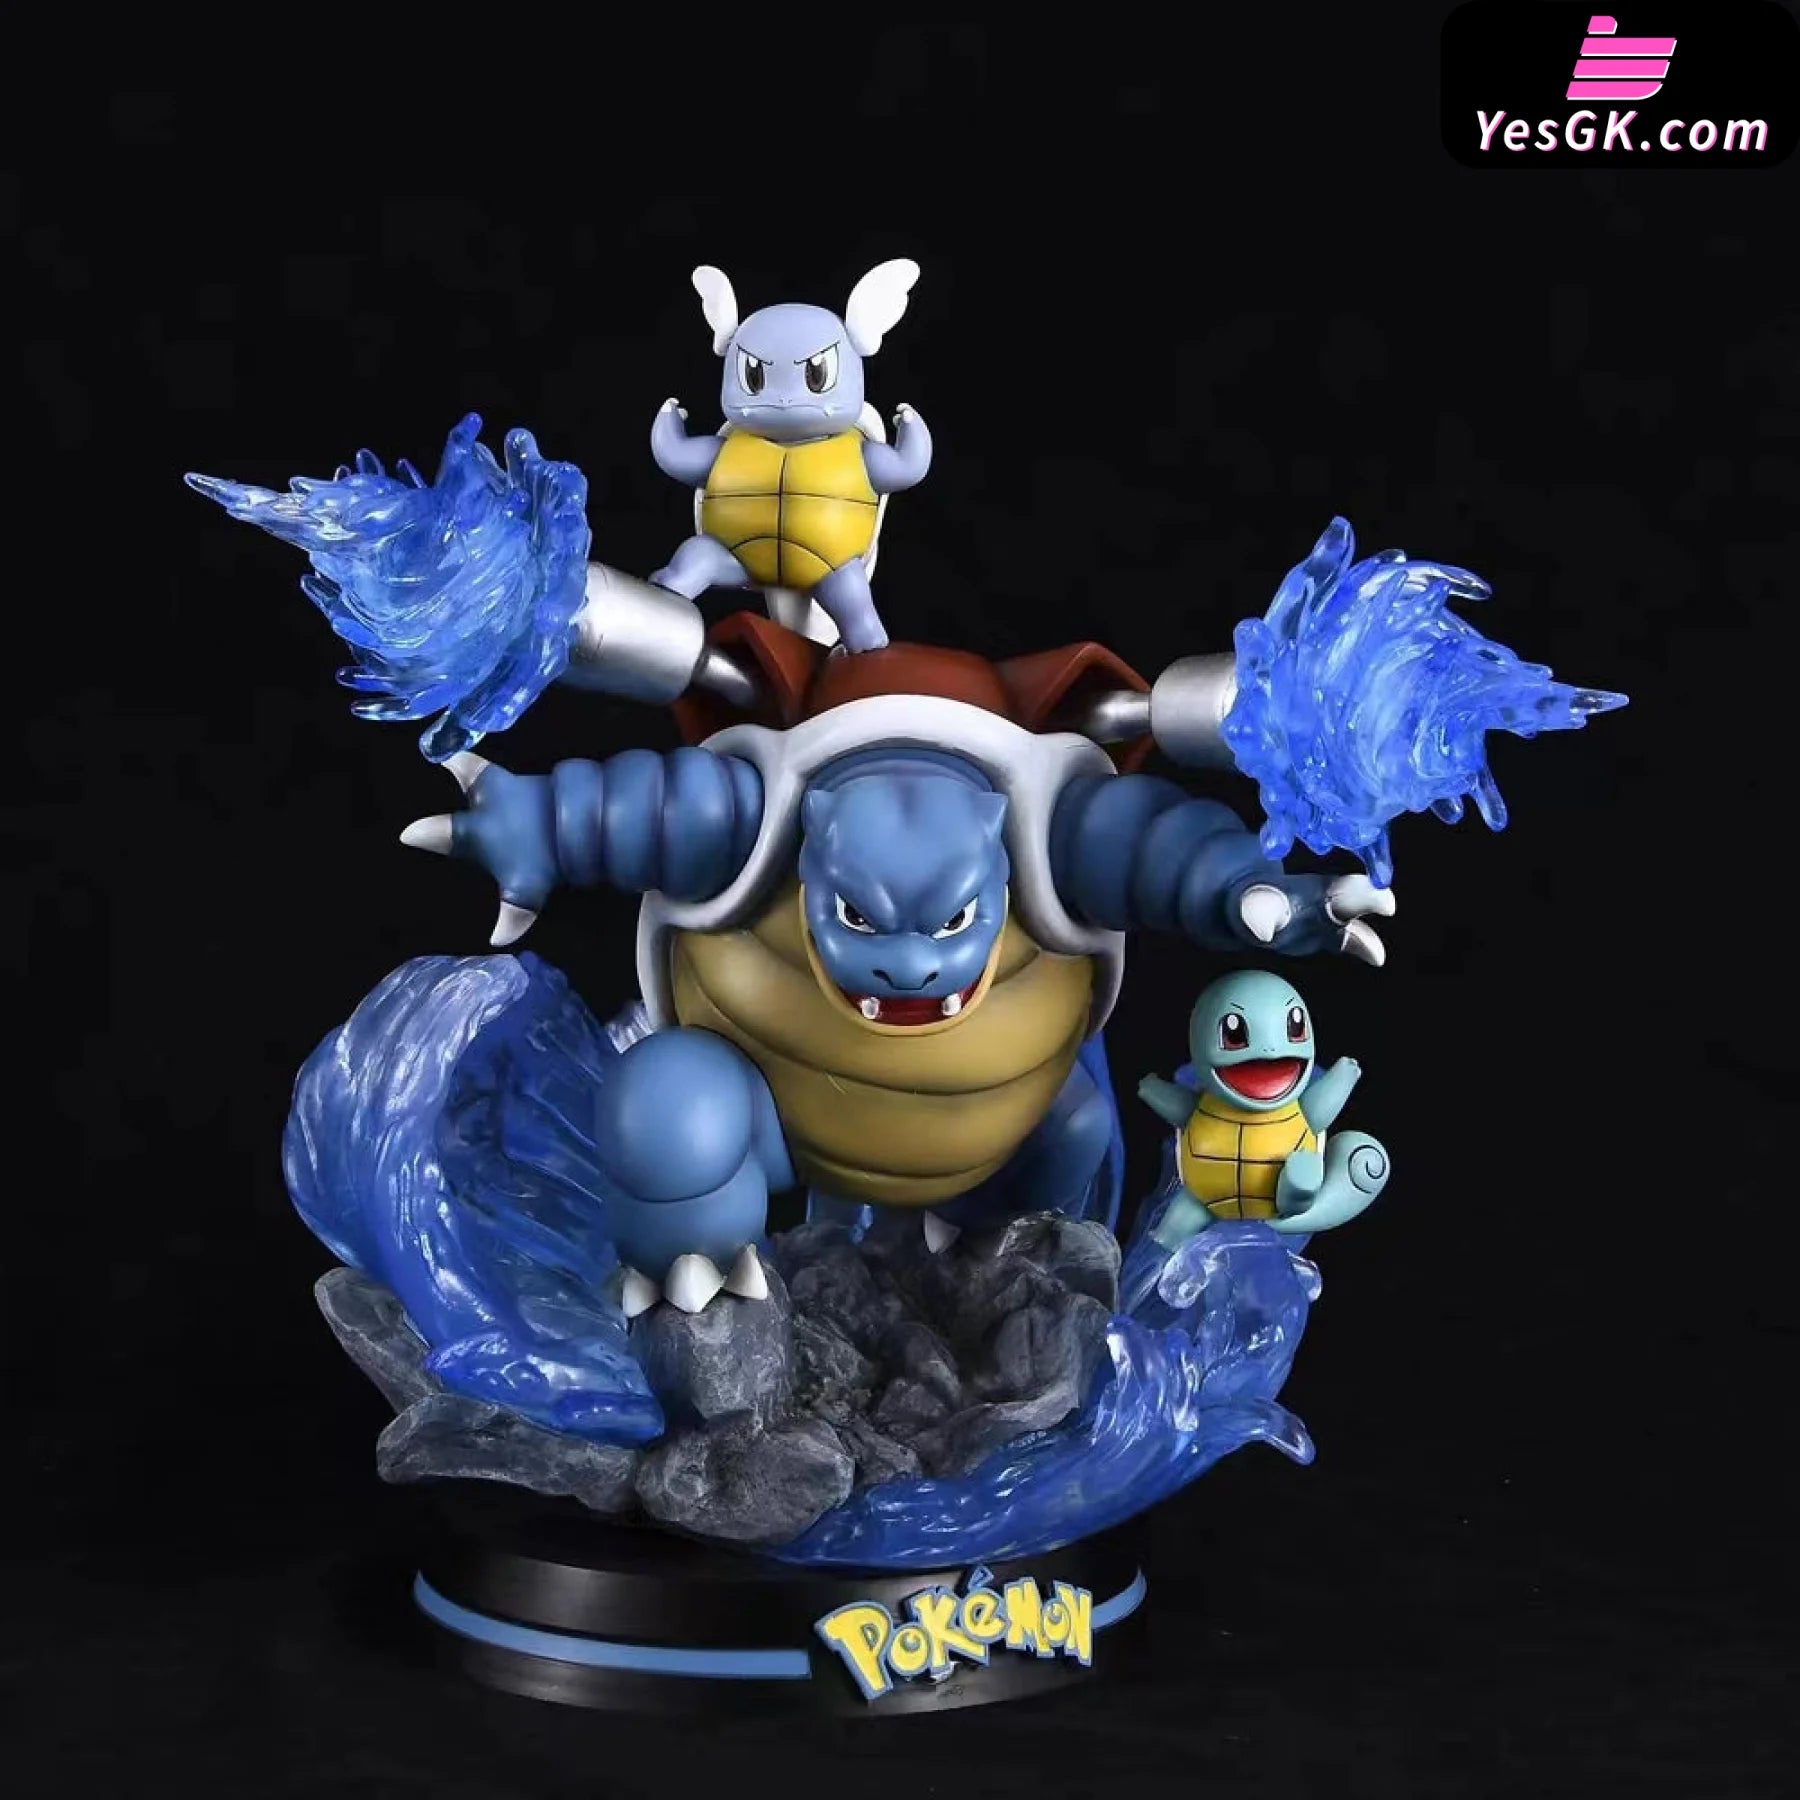 Pokémon First Partner Generation 1.0 Statue - Egg Studio [In Stock] Full Payment / Squirtle